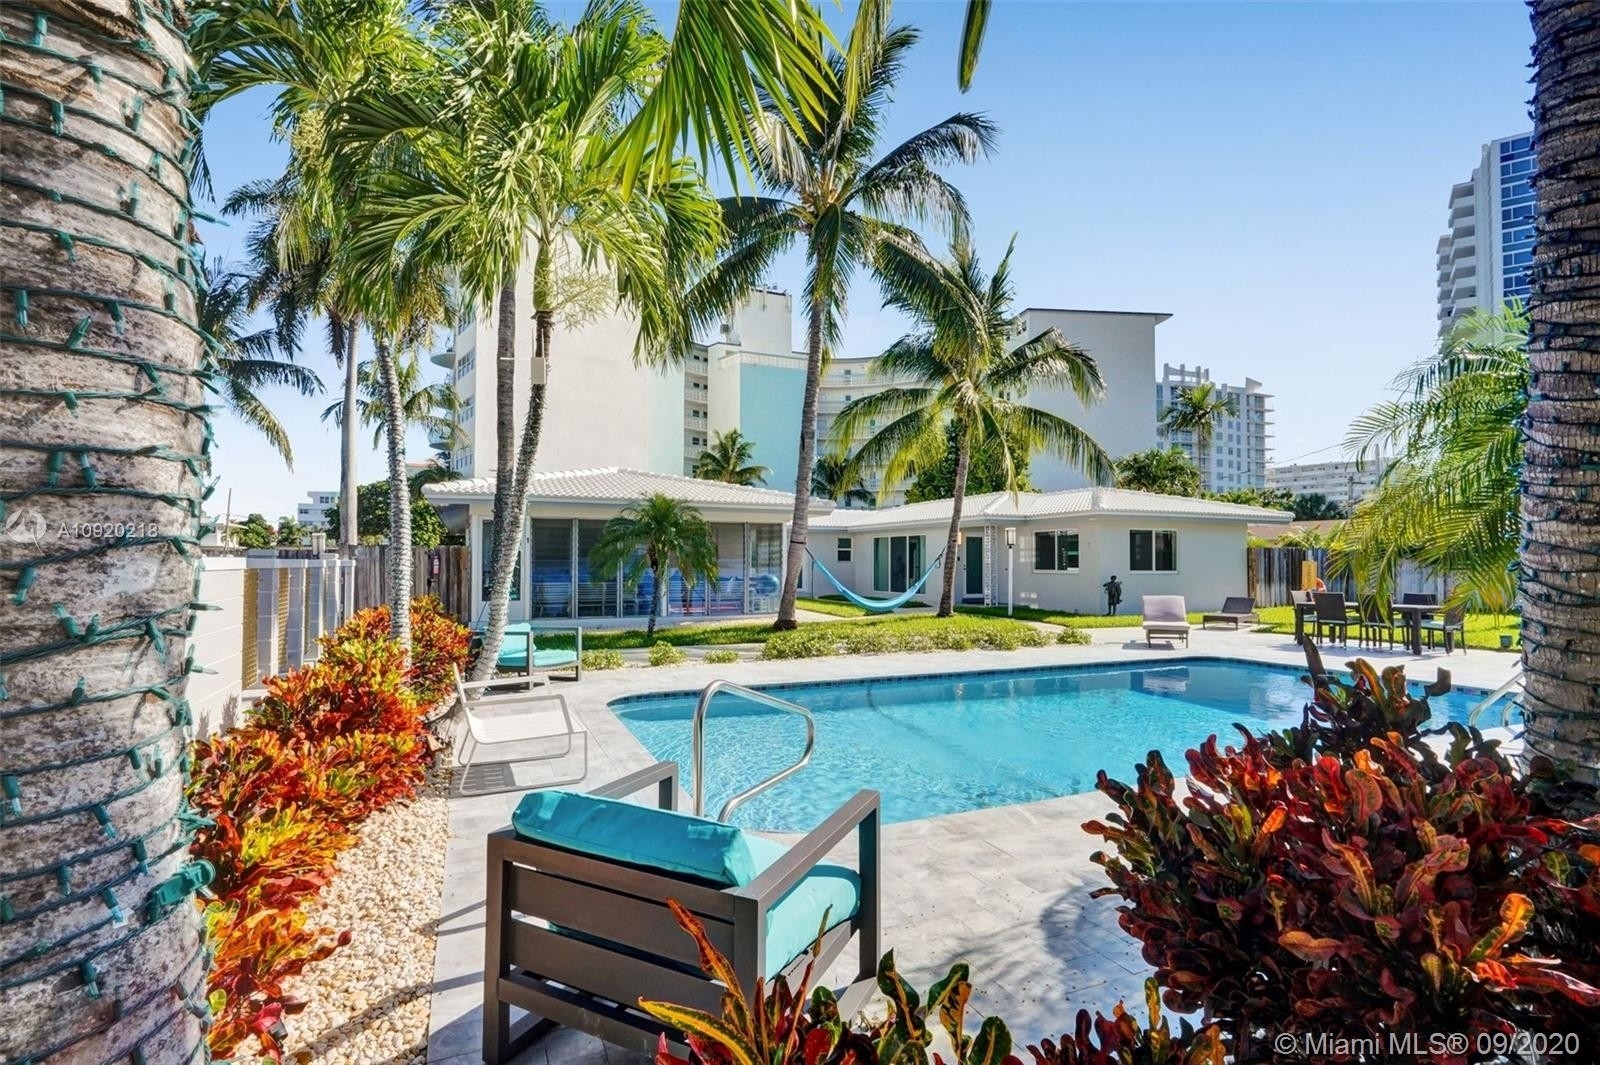 9. Rentals at 2706 NE 32nd Ave, 1 Fort Lauderdale